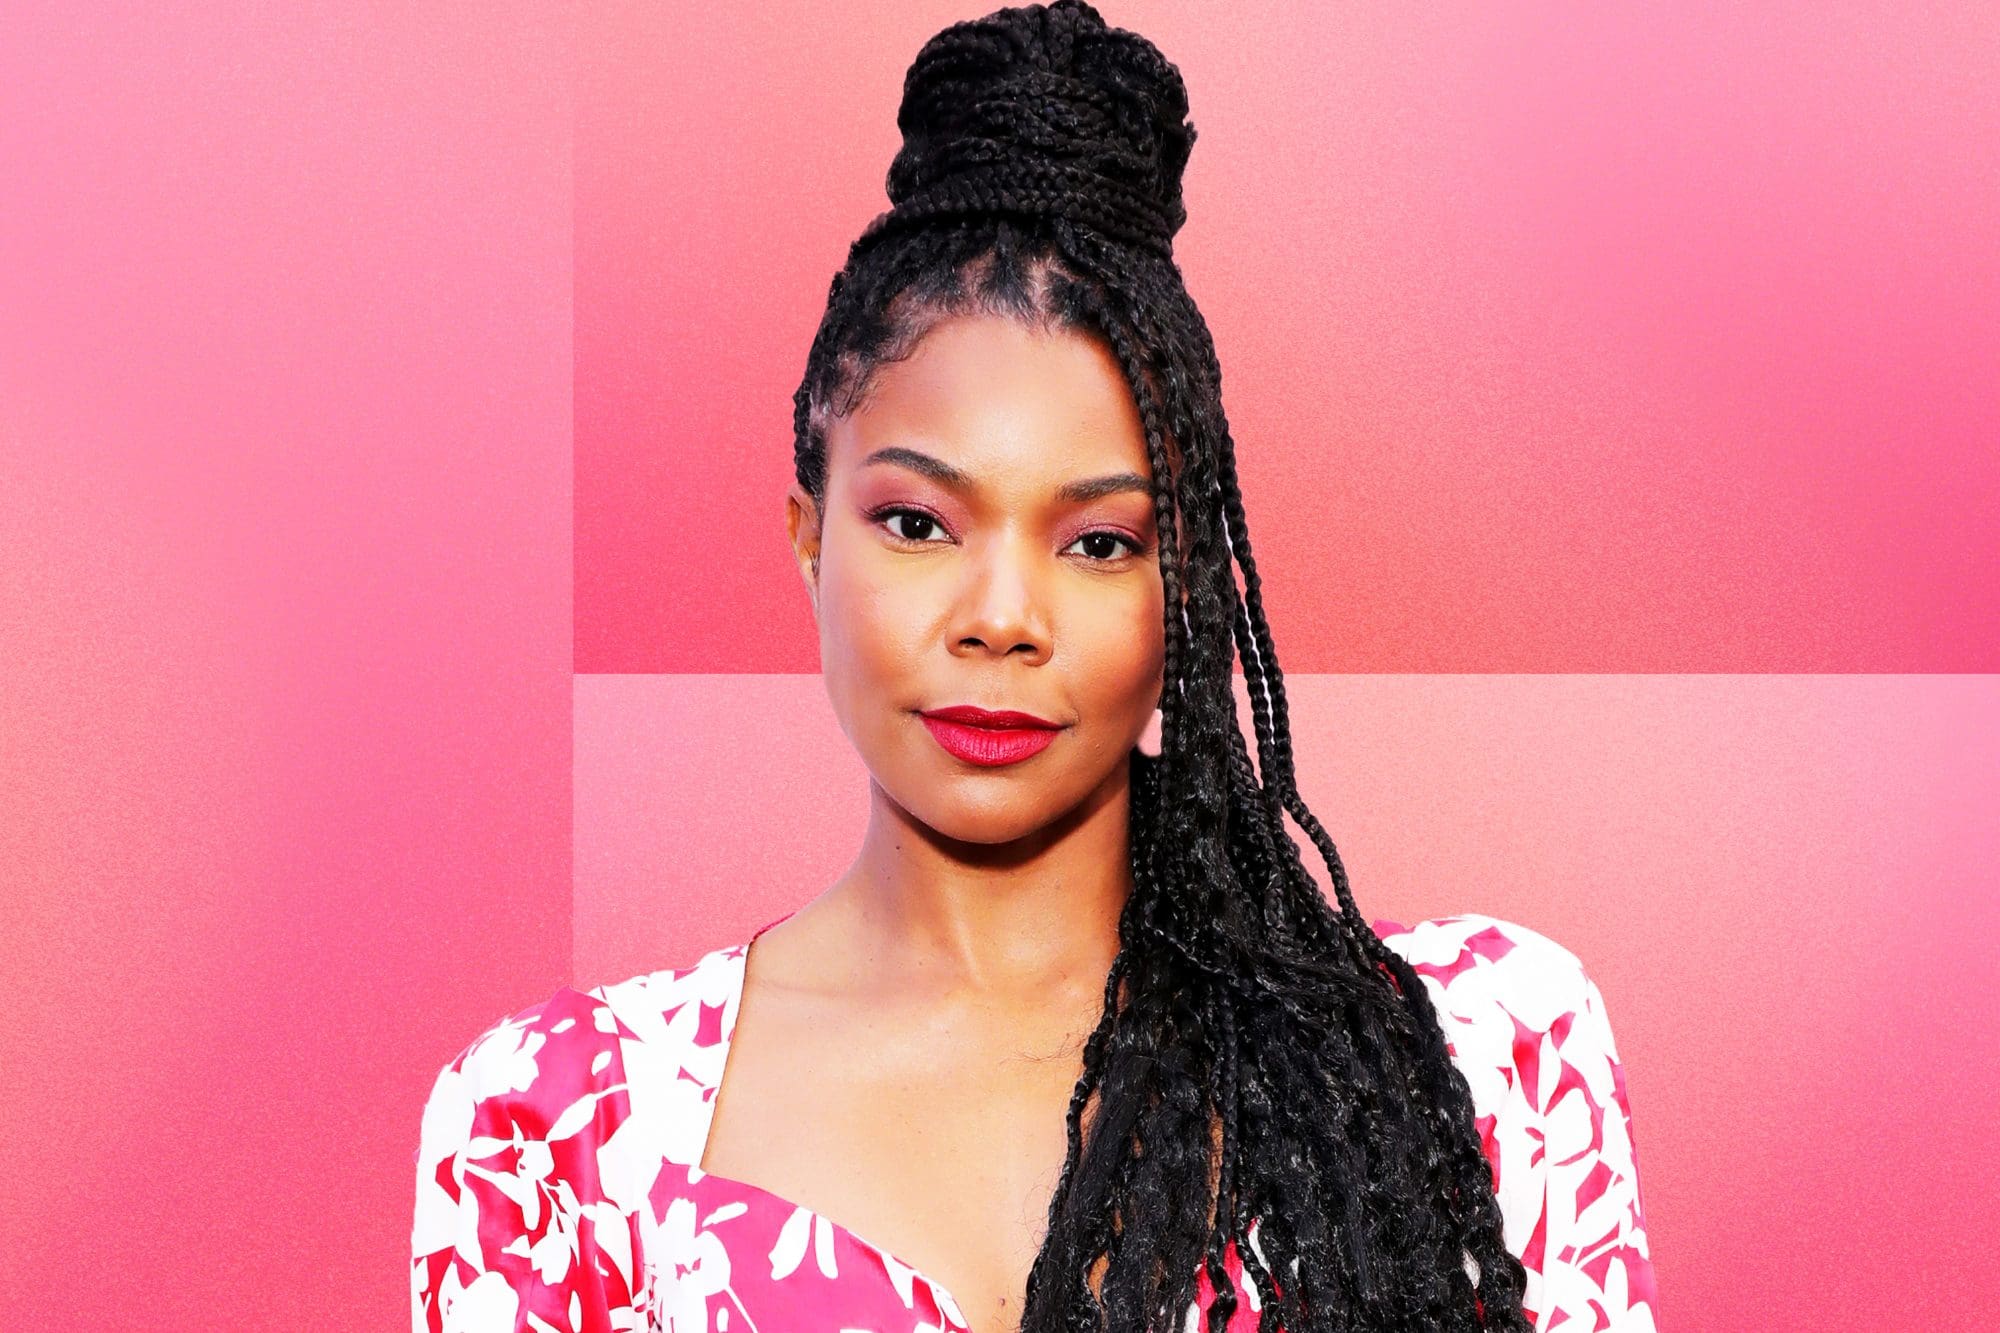 gabrielle-union-shares-the-sweetest-video-featuring-her-daughter-as-a-mermaid